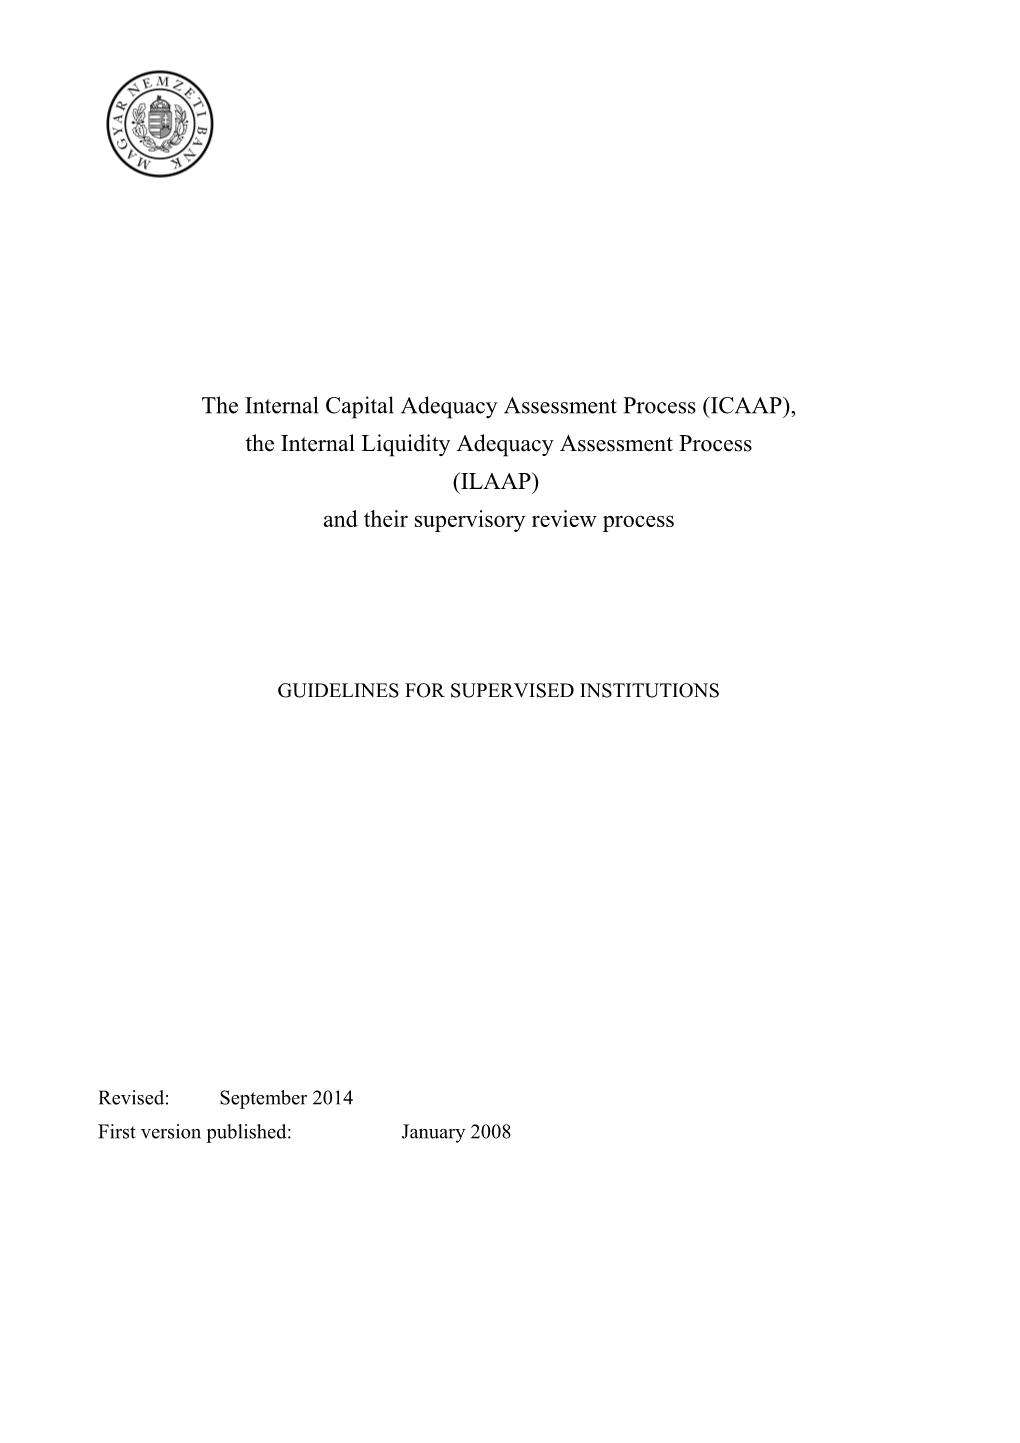 The Internal Capital Adequacy Assessment Process (ICAAP)